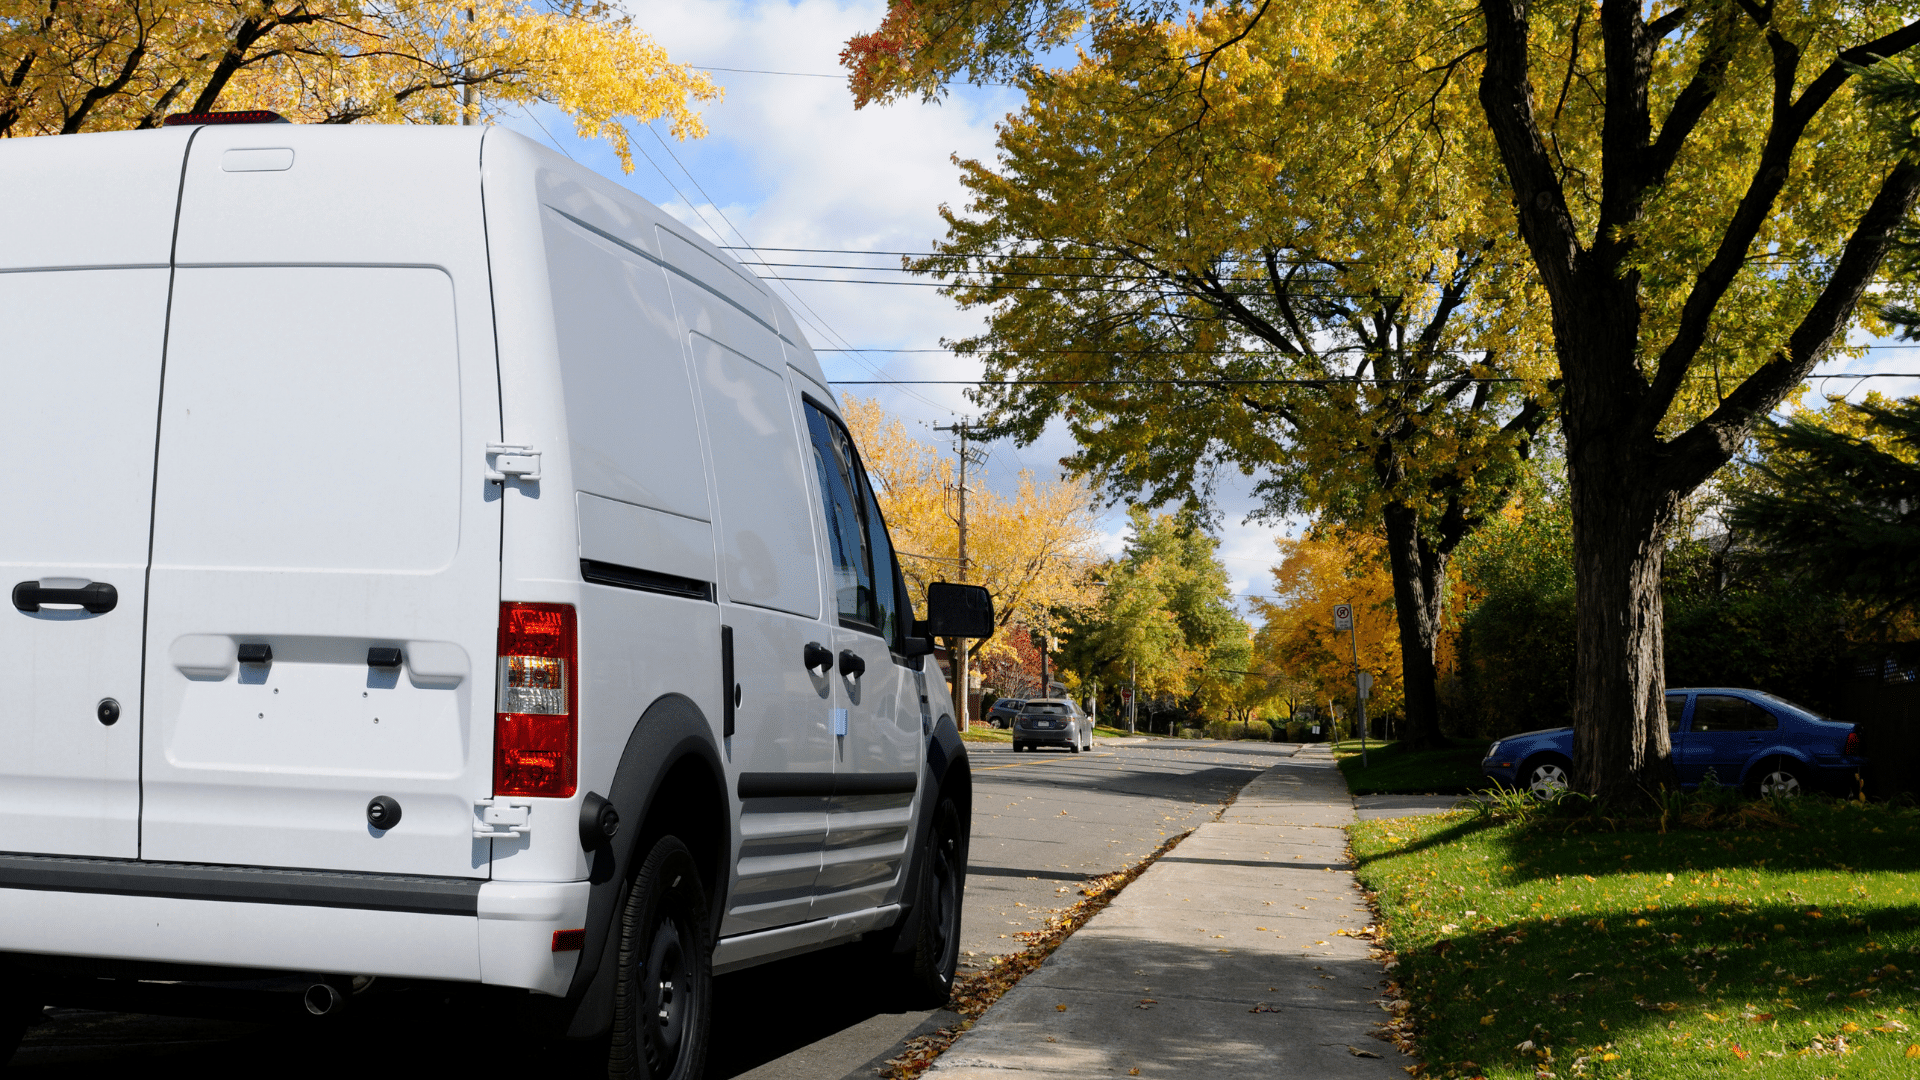 Van parked near curb with green grass and trees